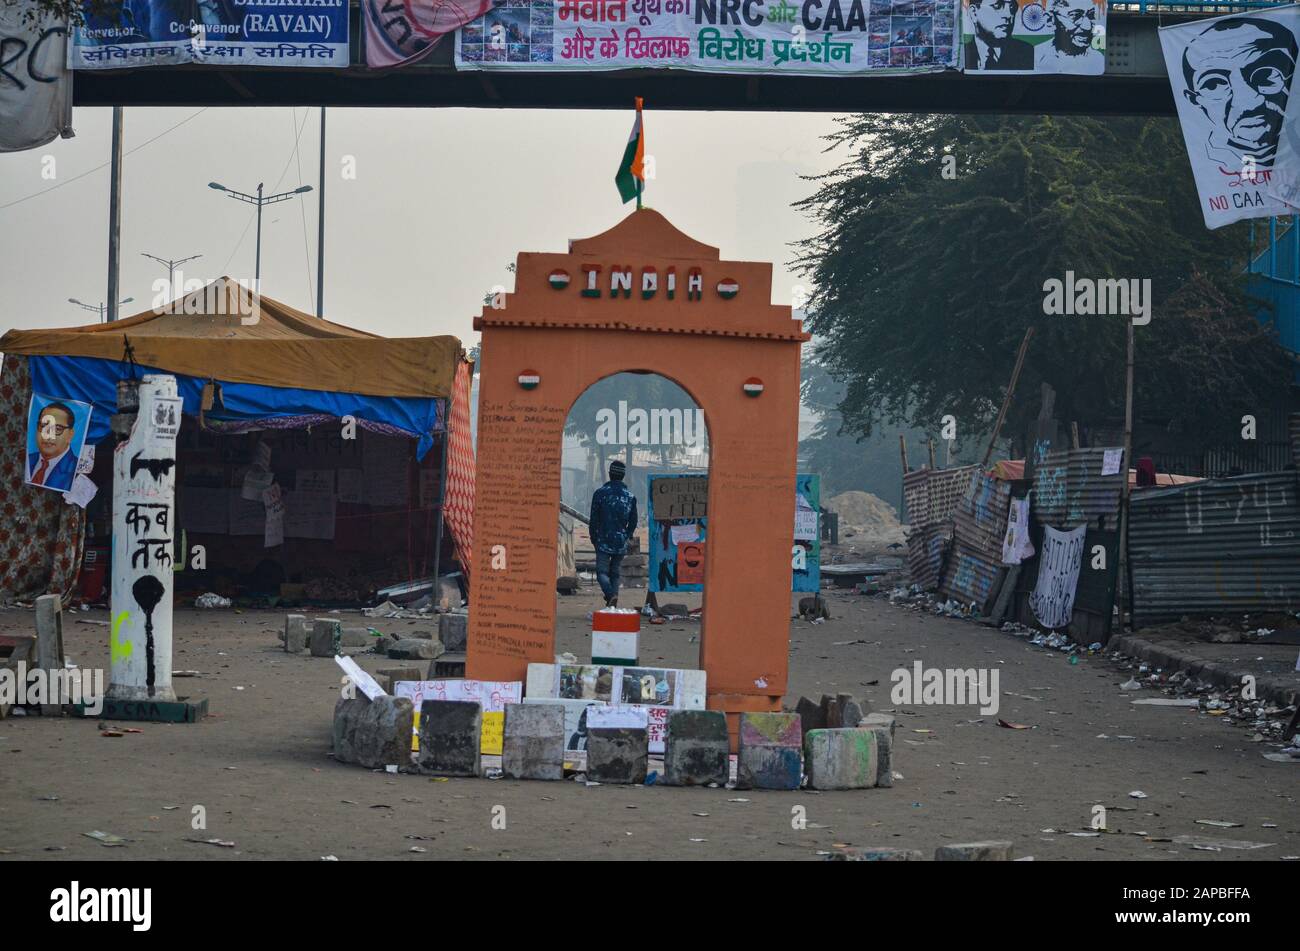 Women Protest against CAA & NRC, Shaheen Bagh, New Delhi, India-January 12, 2020: The replica of India Gate at the Shaheen Bagh, New Delhi. Stock Photo